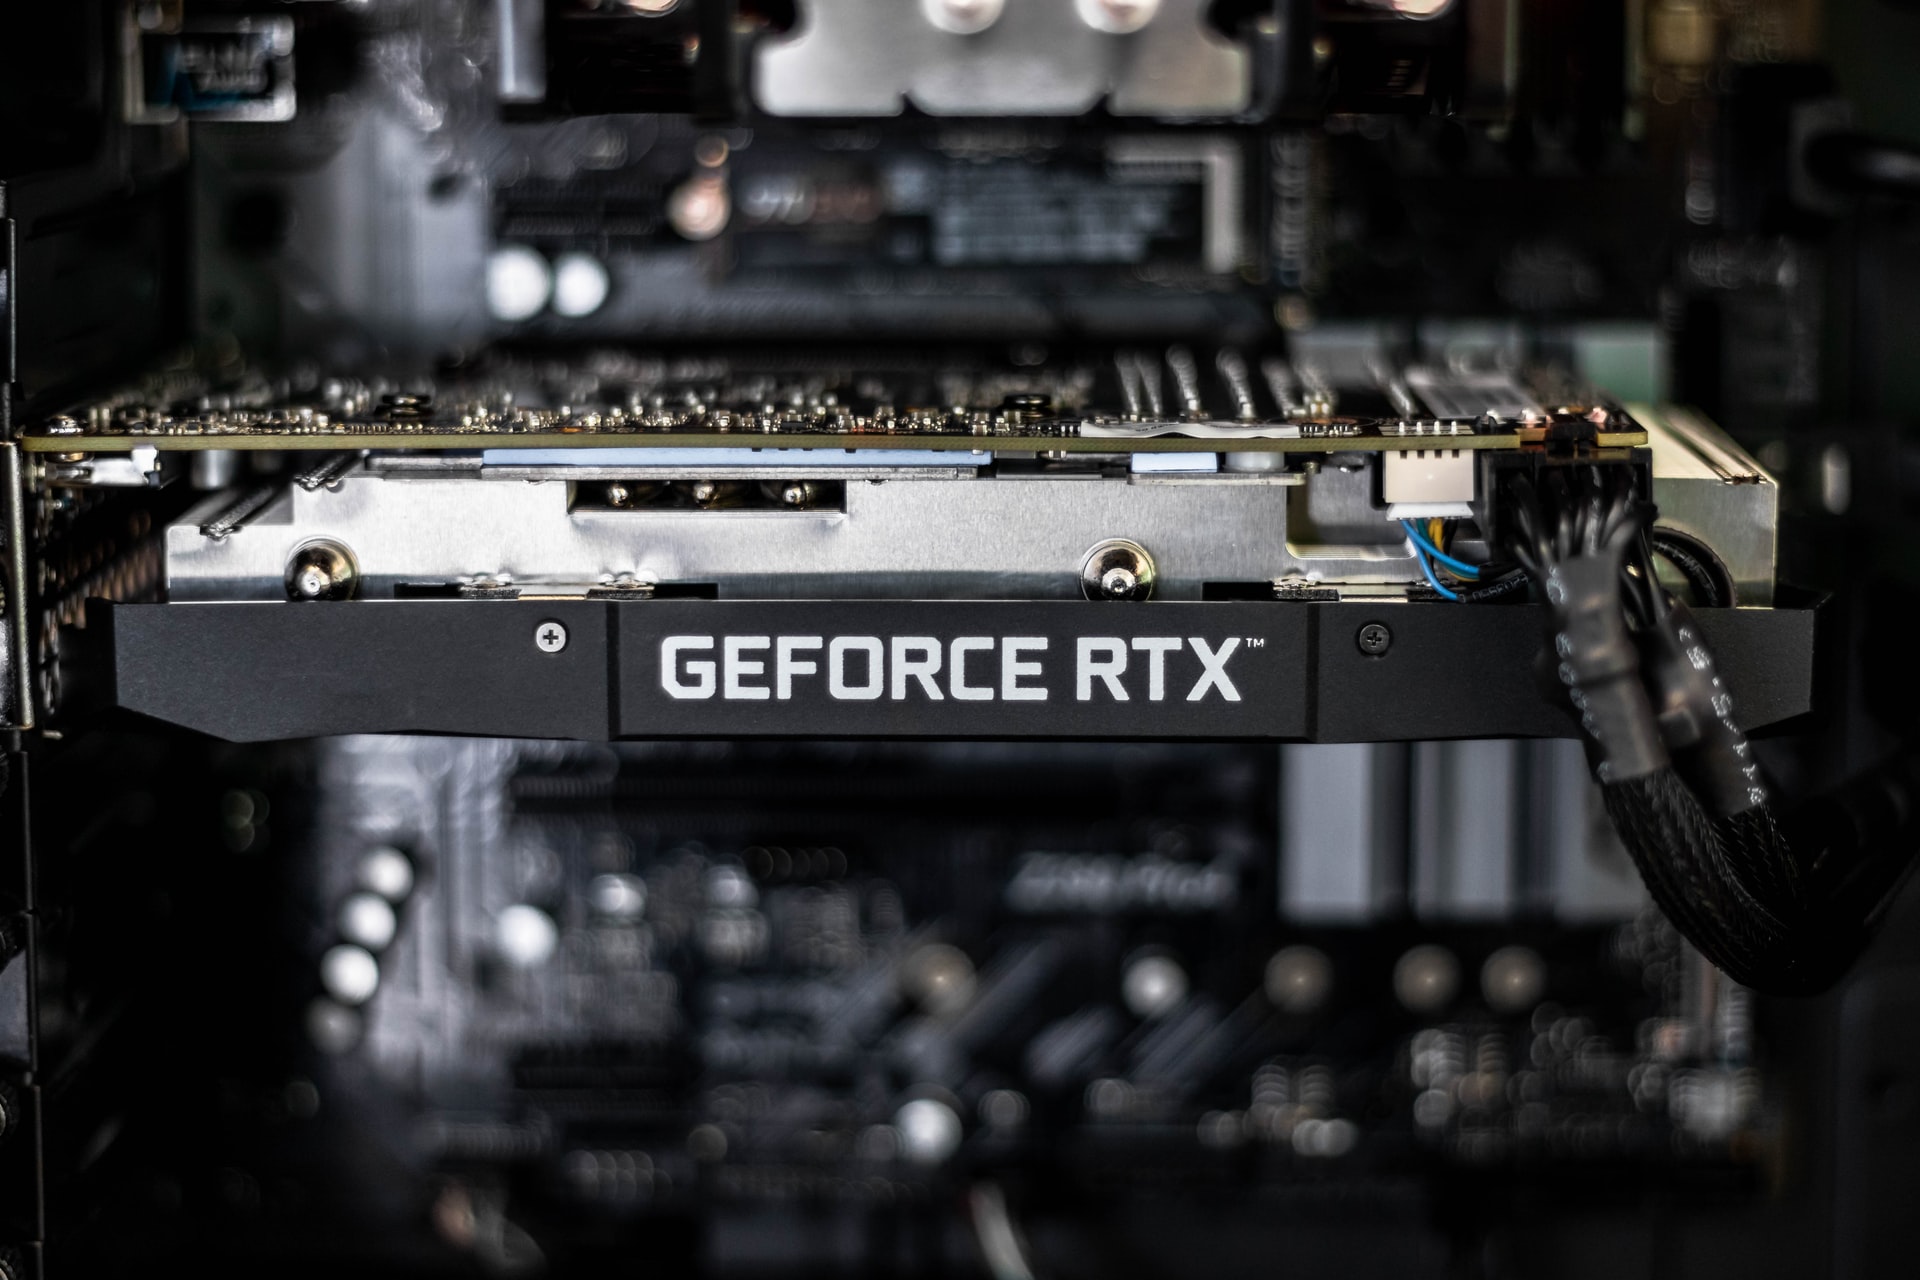 ## VRAM configuration of RTX 3060 with 12 GB